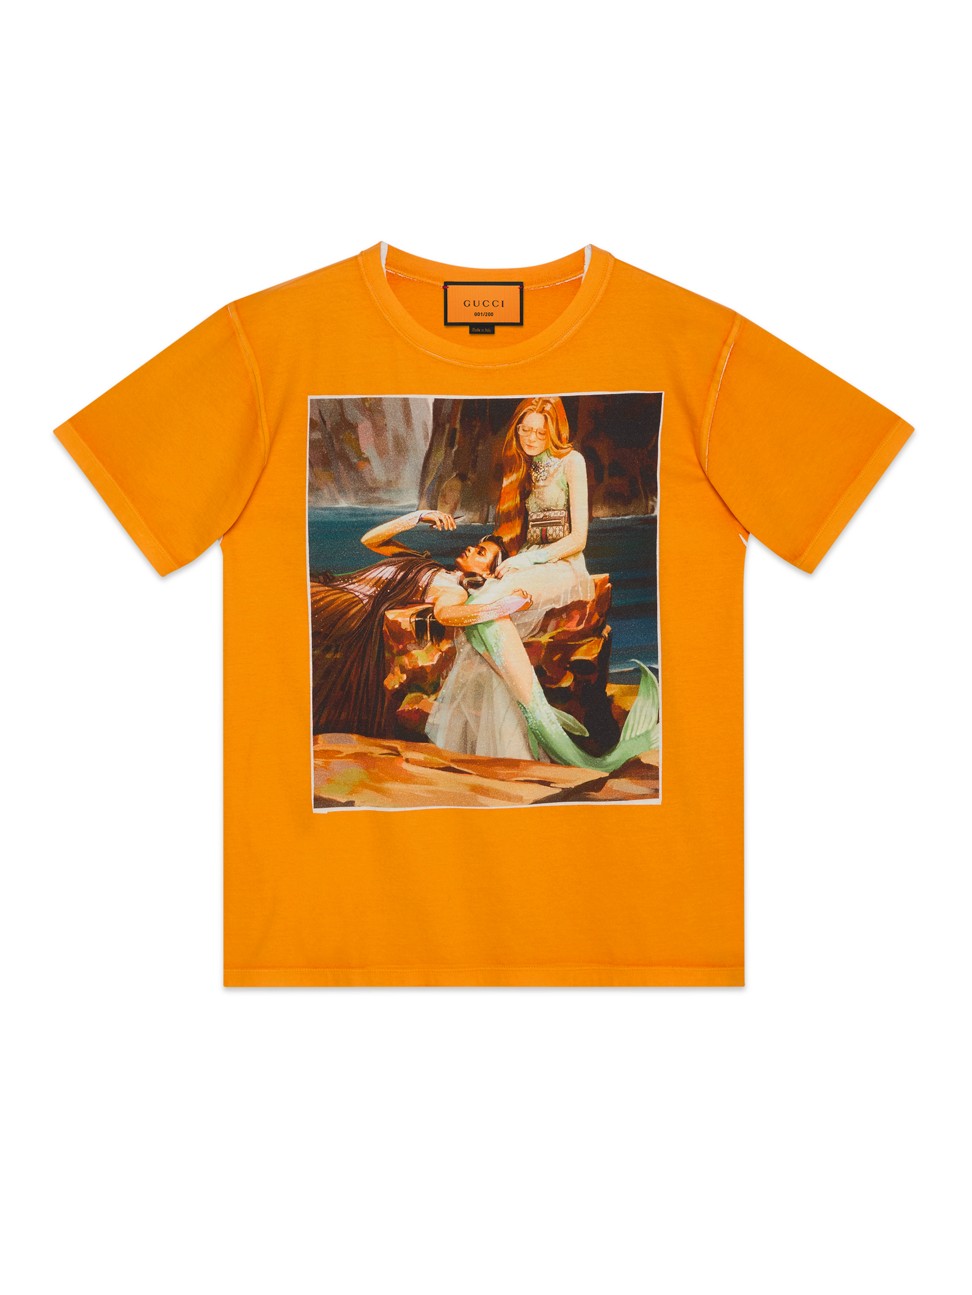 Gucci launches sweatshirts and T-shirts in collaboration with artist ...